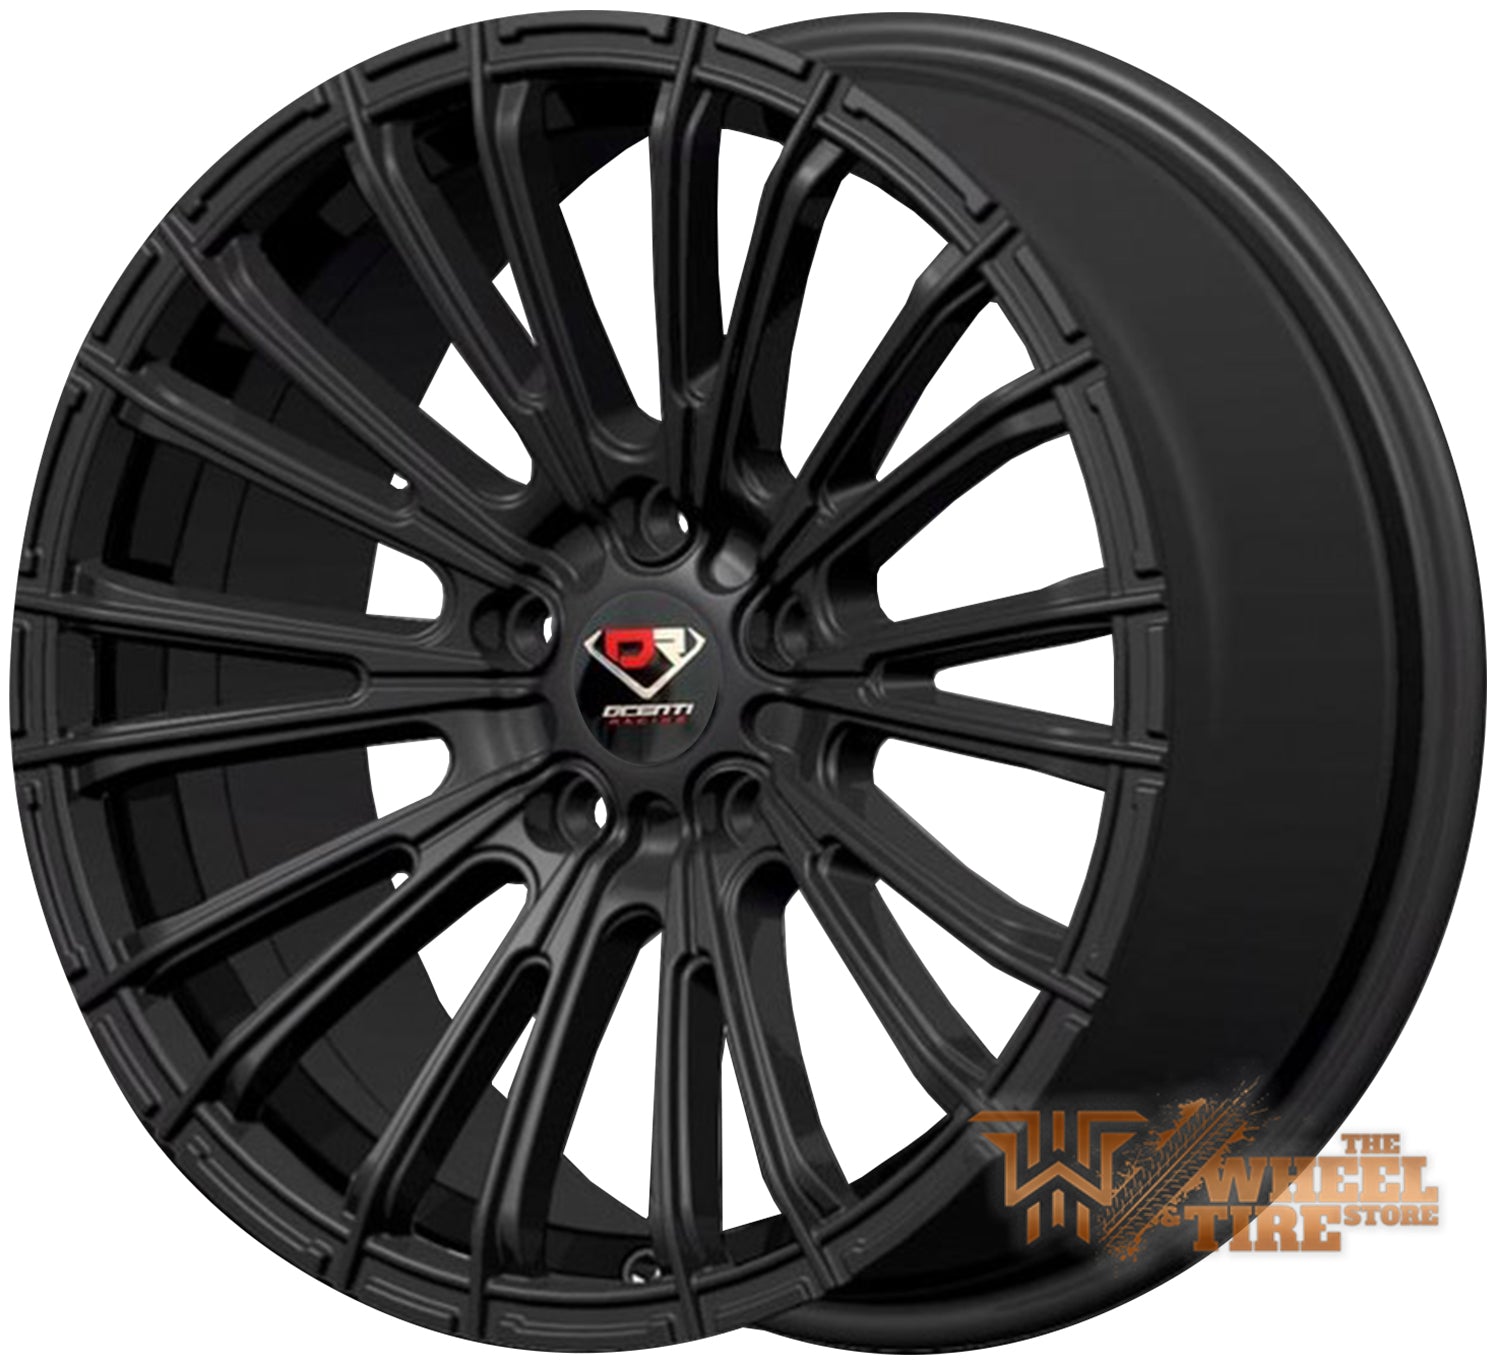 DCENTI Racing DCTL006 Wheel in Gloss Black (Set of 4)